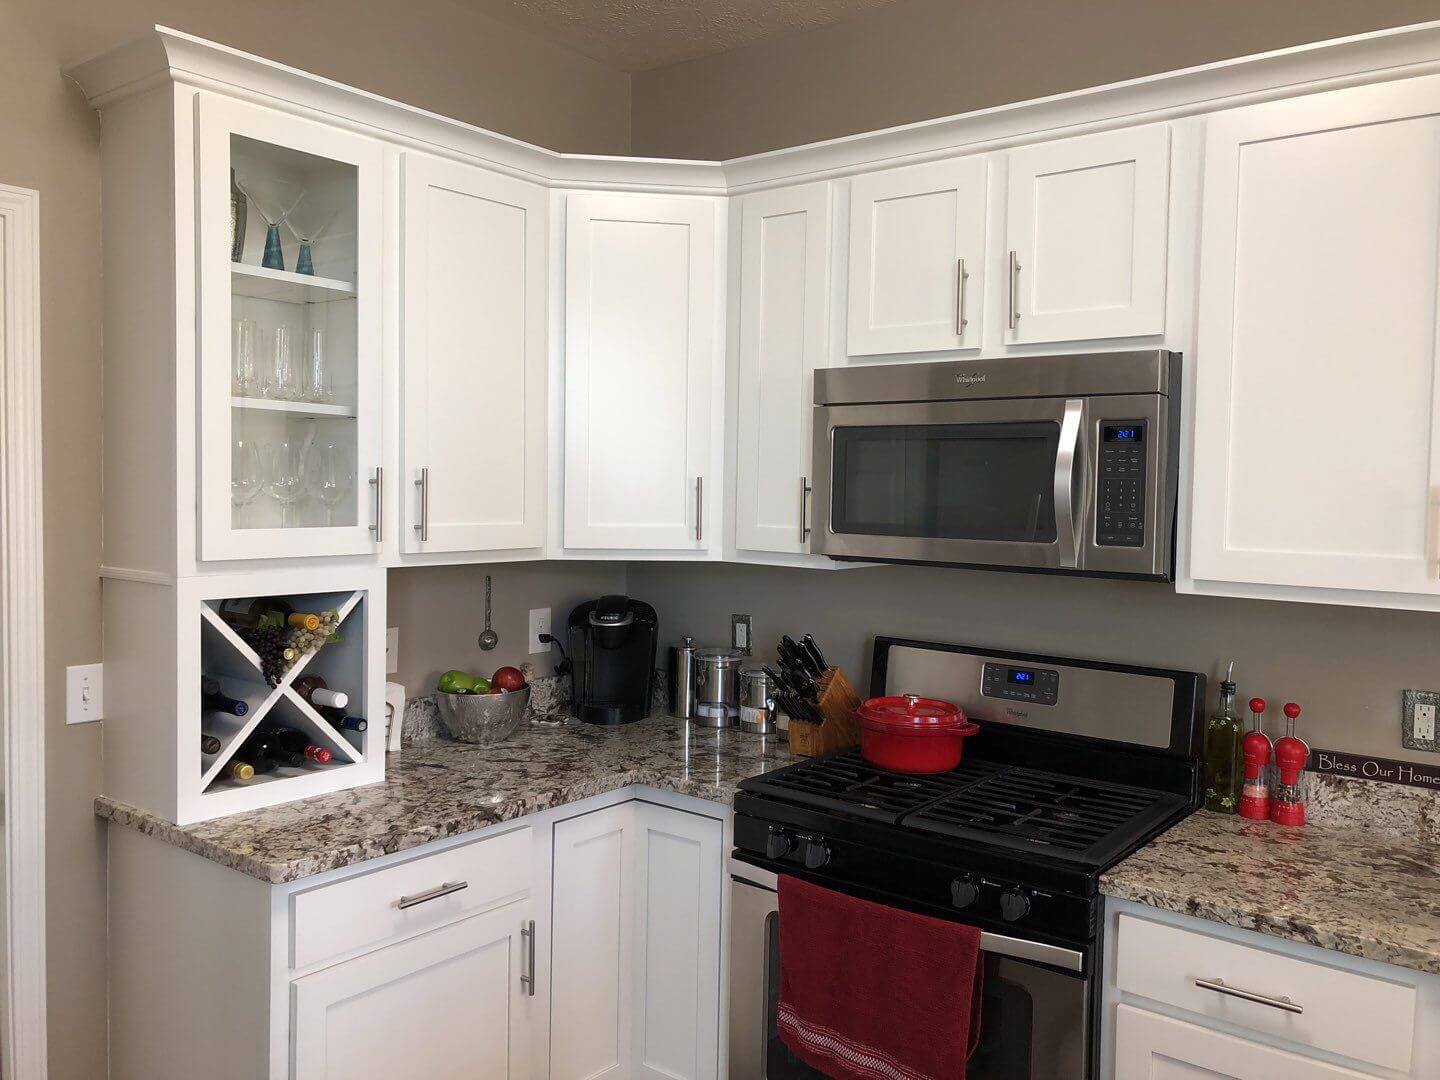 painting white kitchen cabinet should the wall match